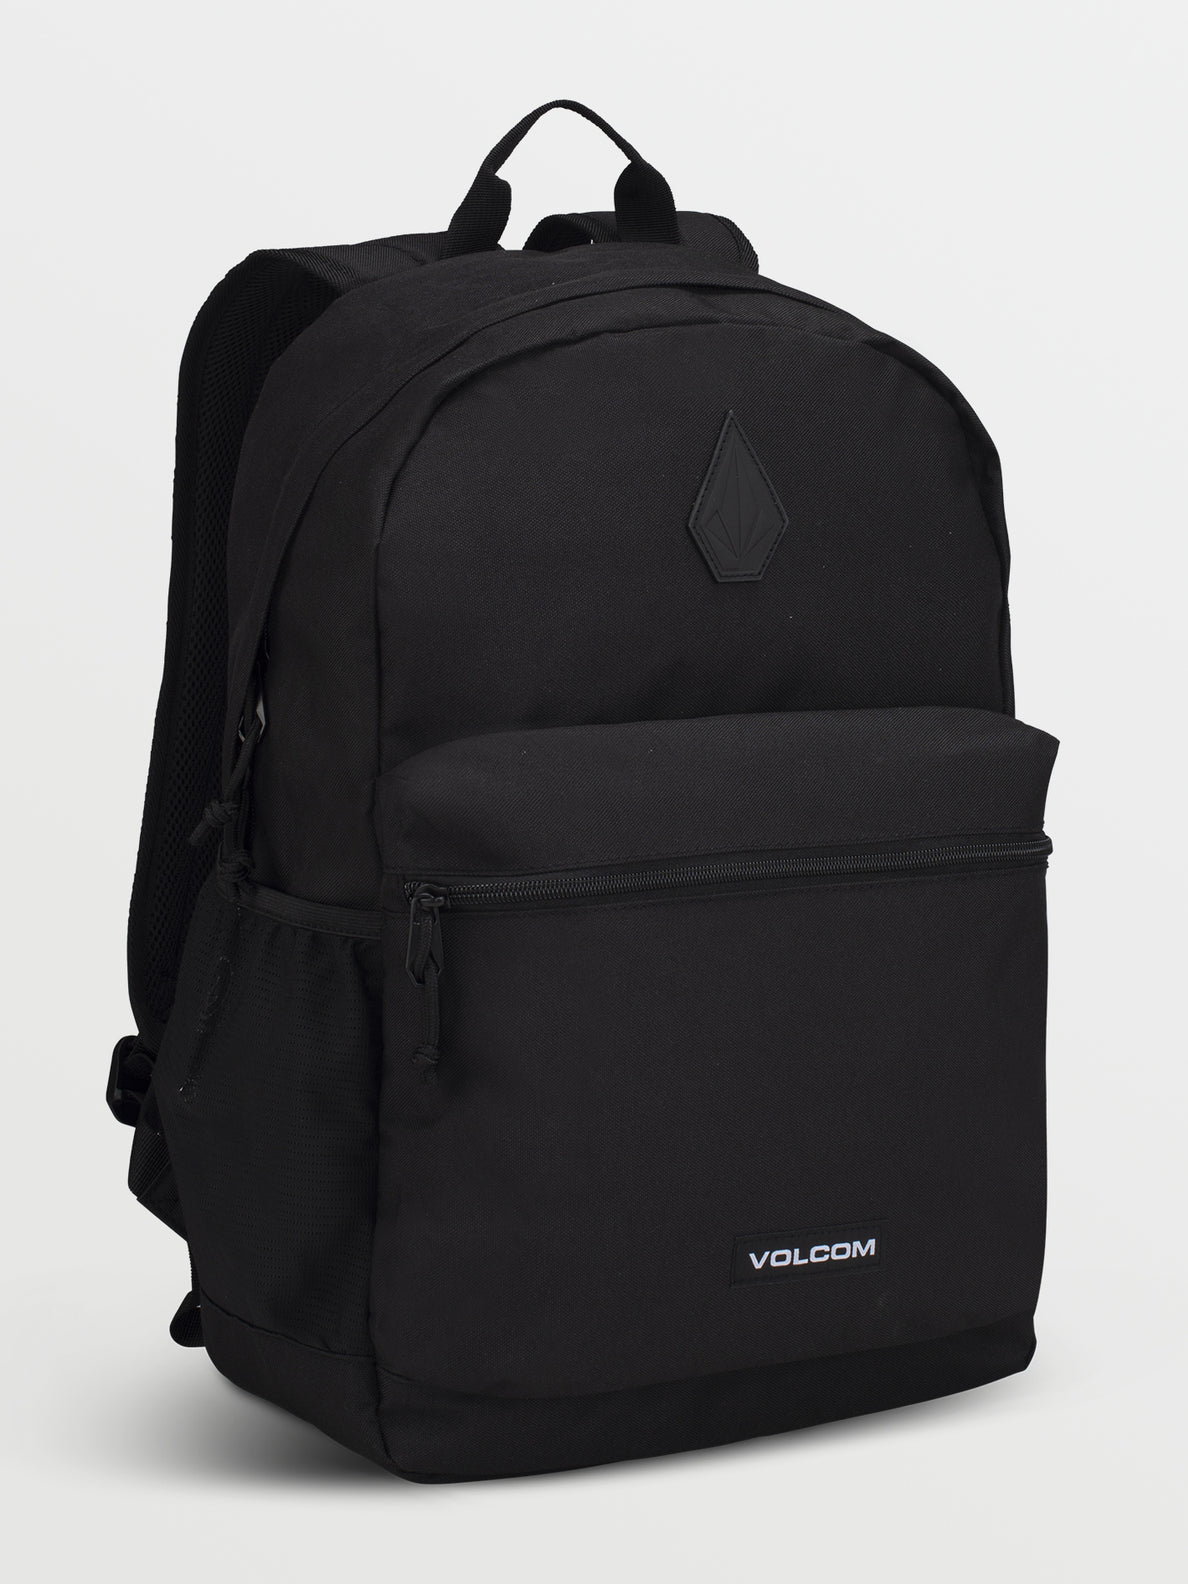 Launch Backpack - Black